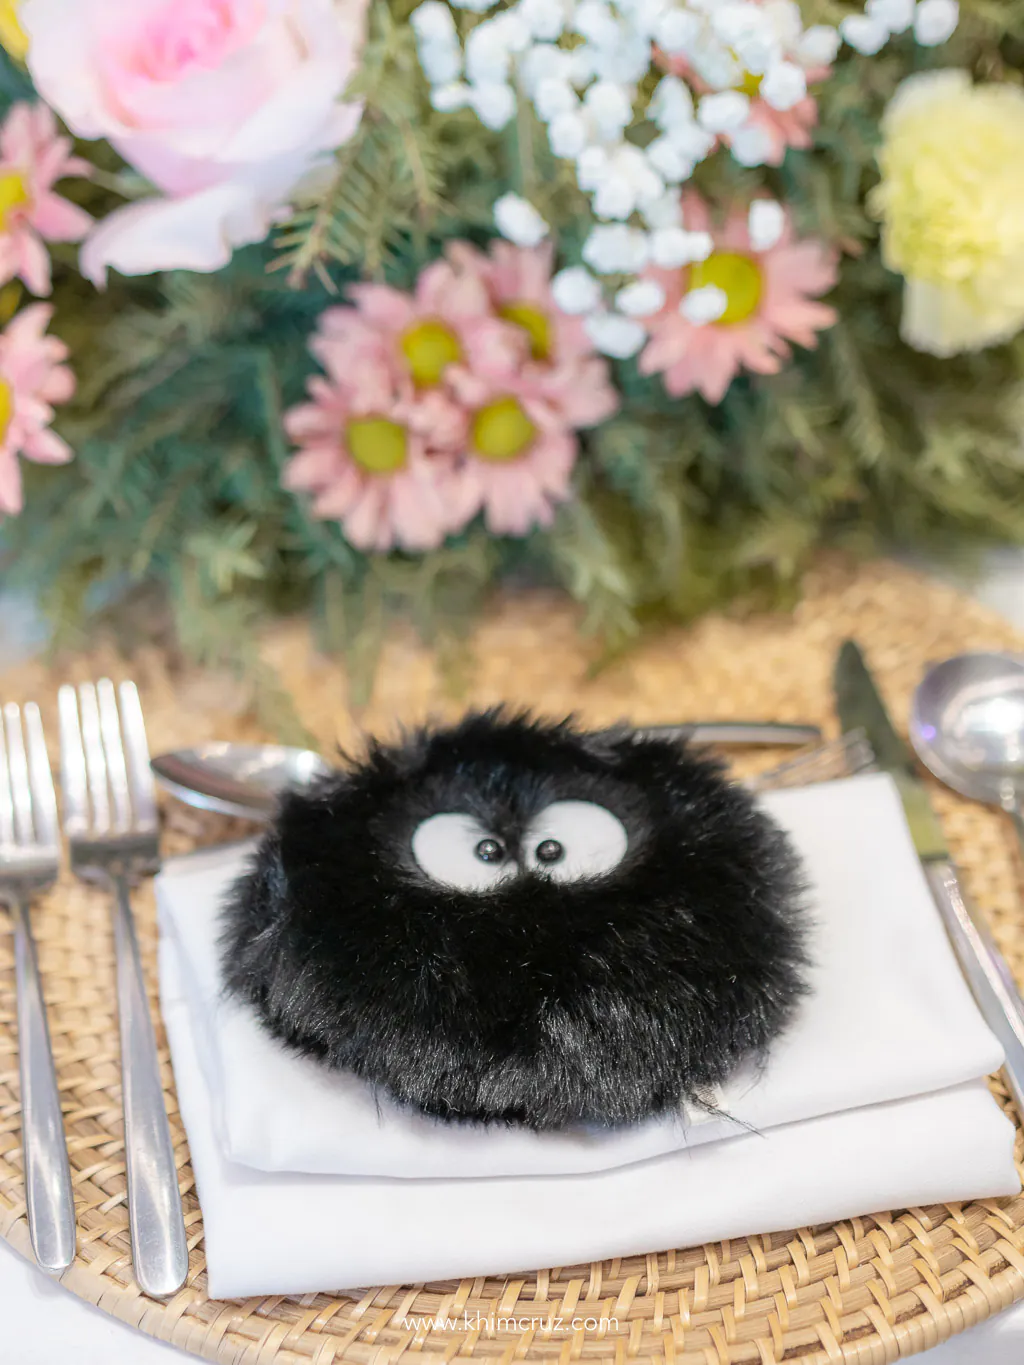 Totoro Sprite character table details to compliment floral centerpieces